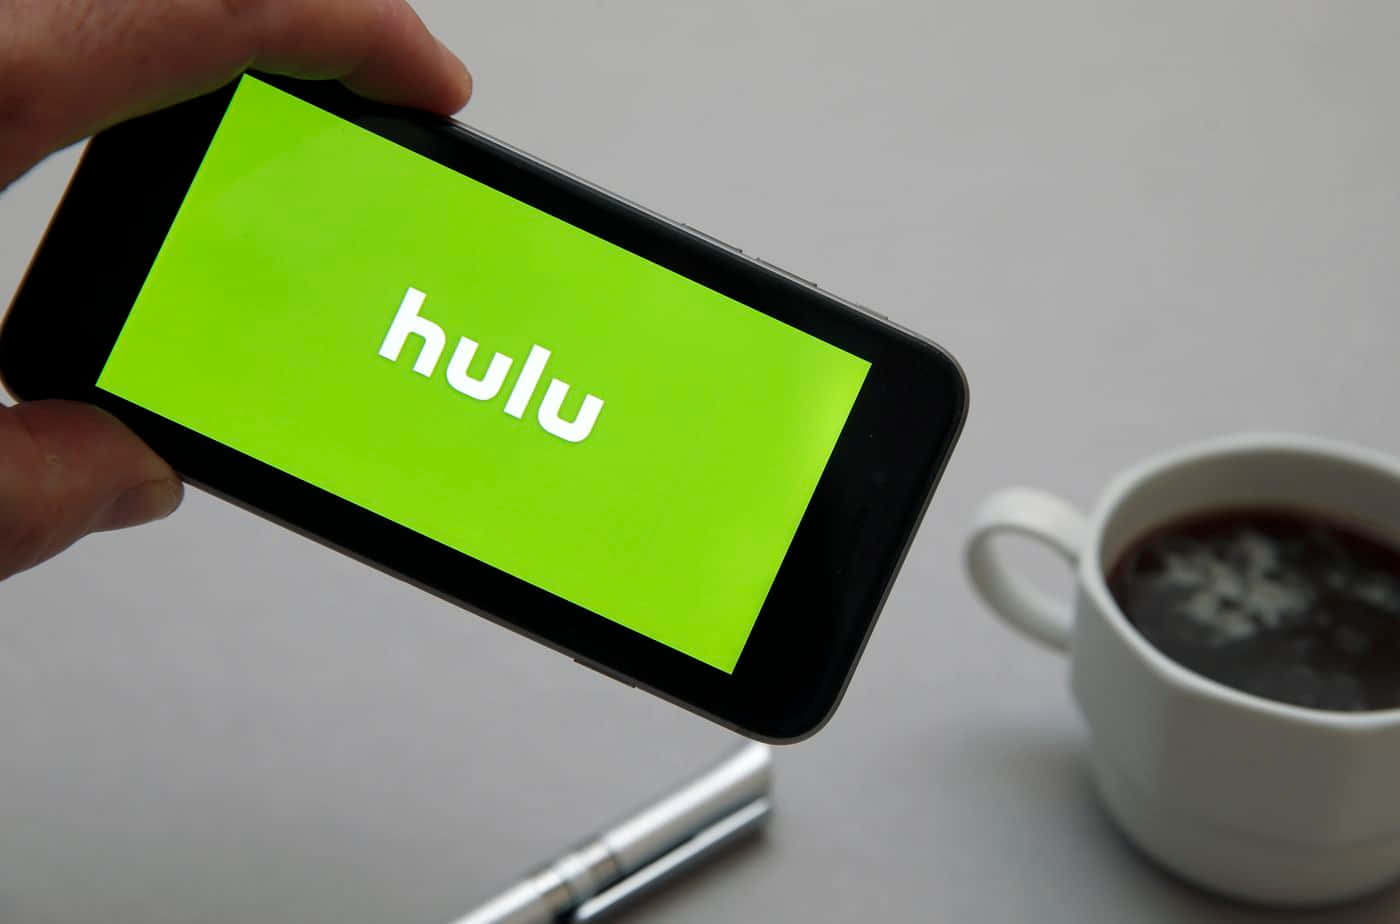 Hulu - All your streaming in one place